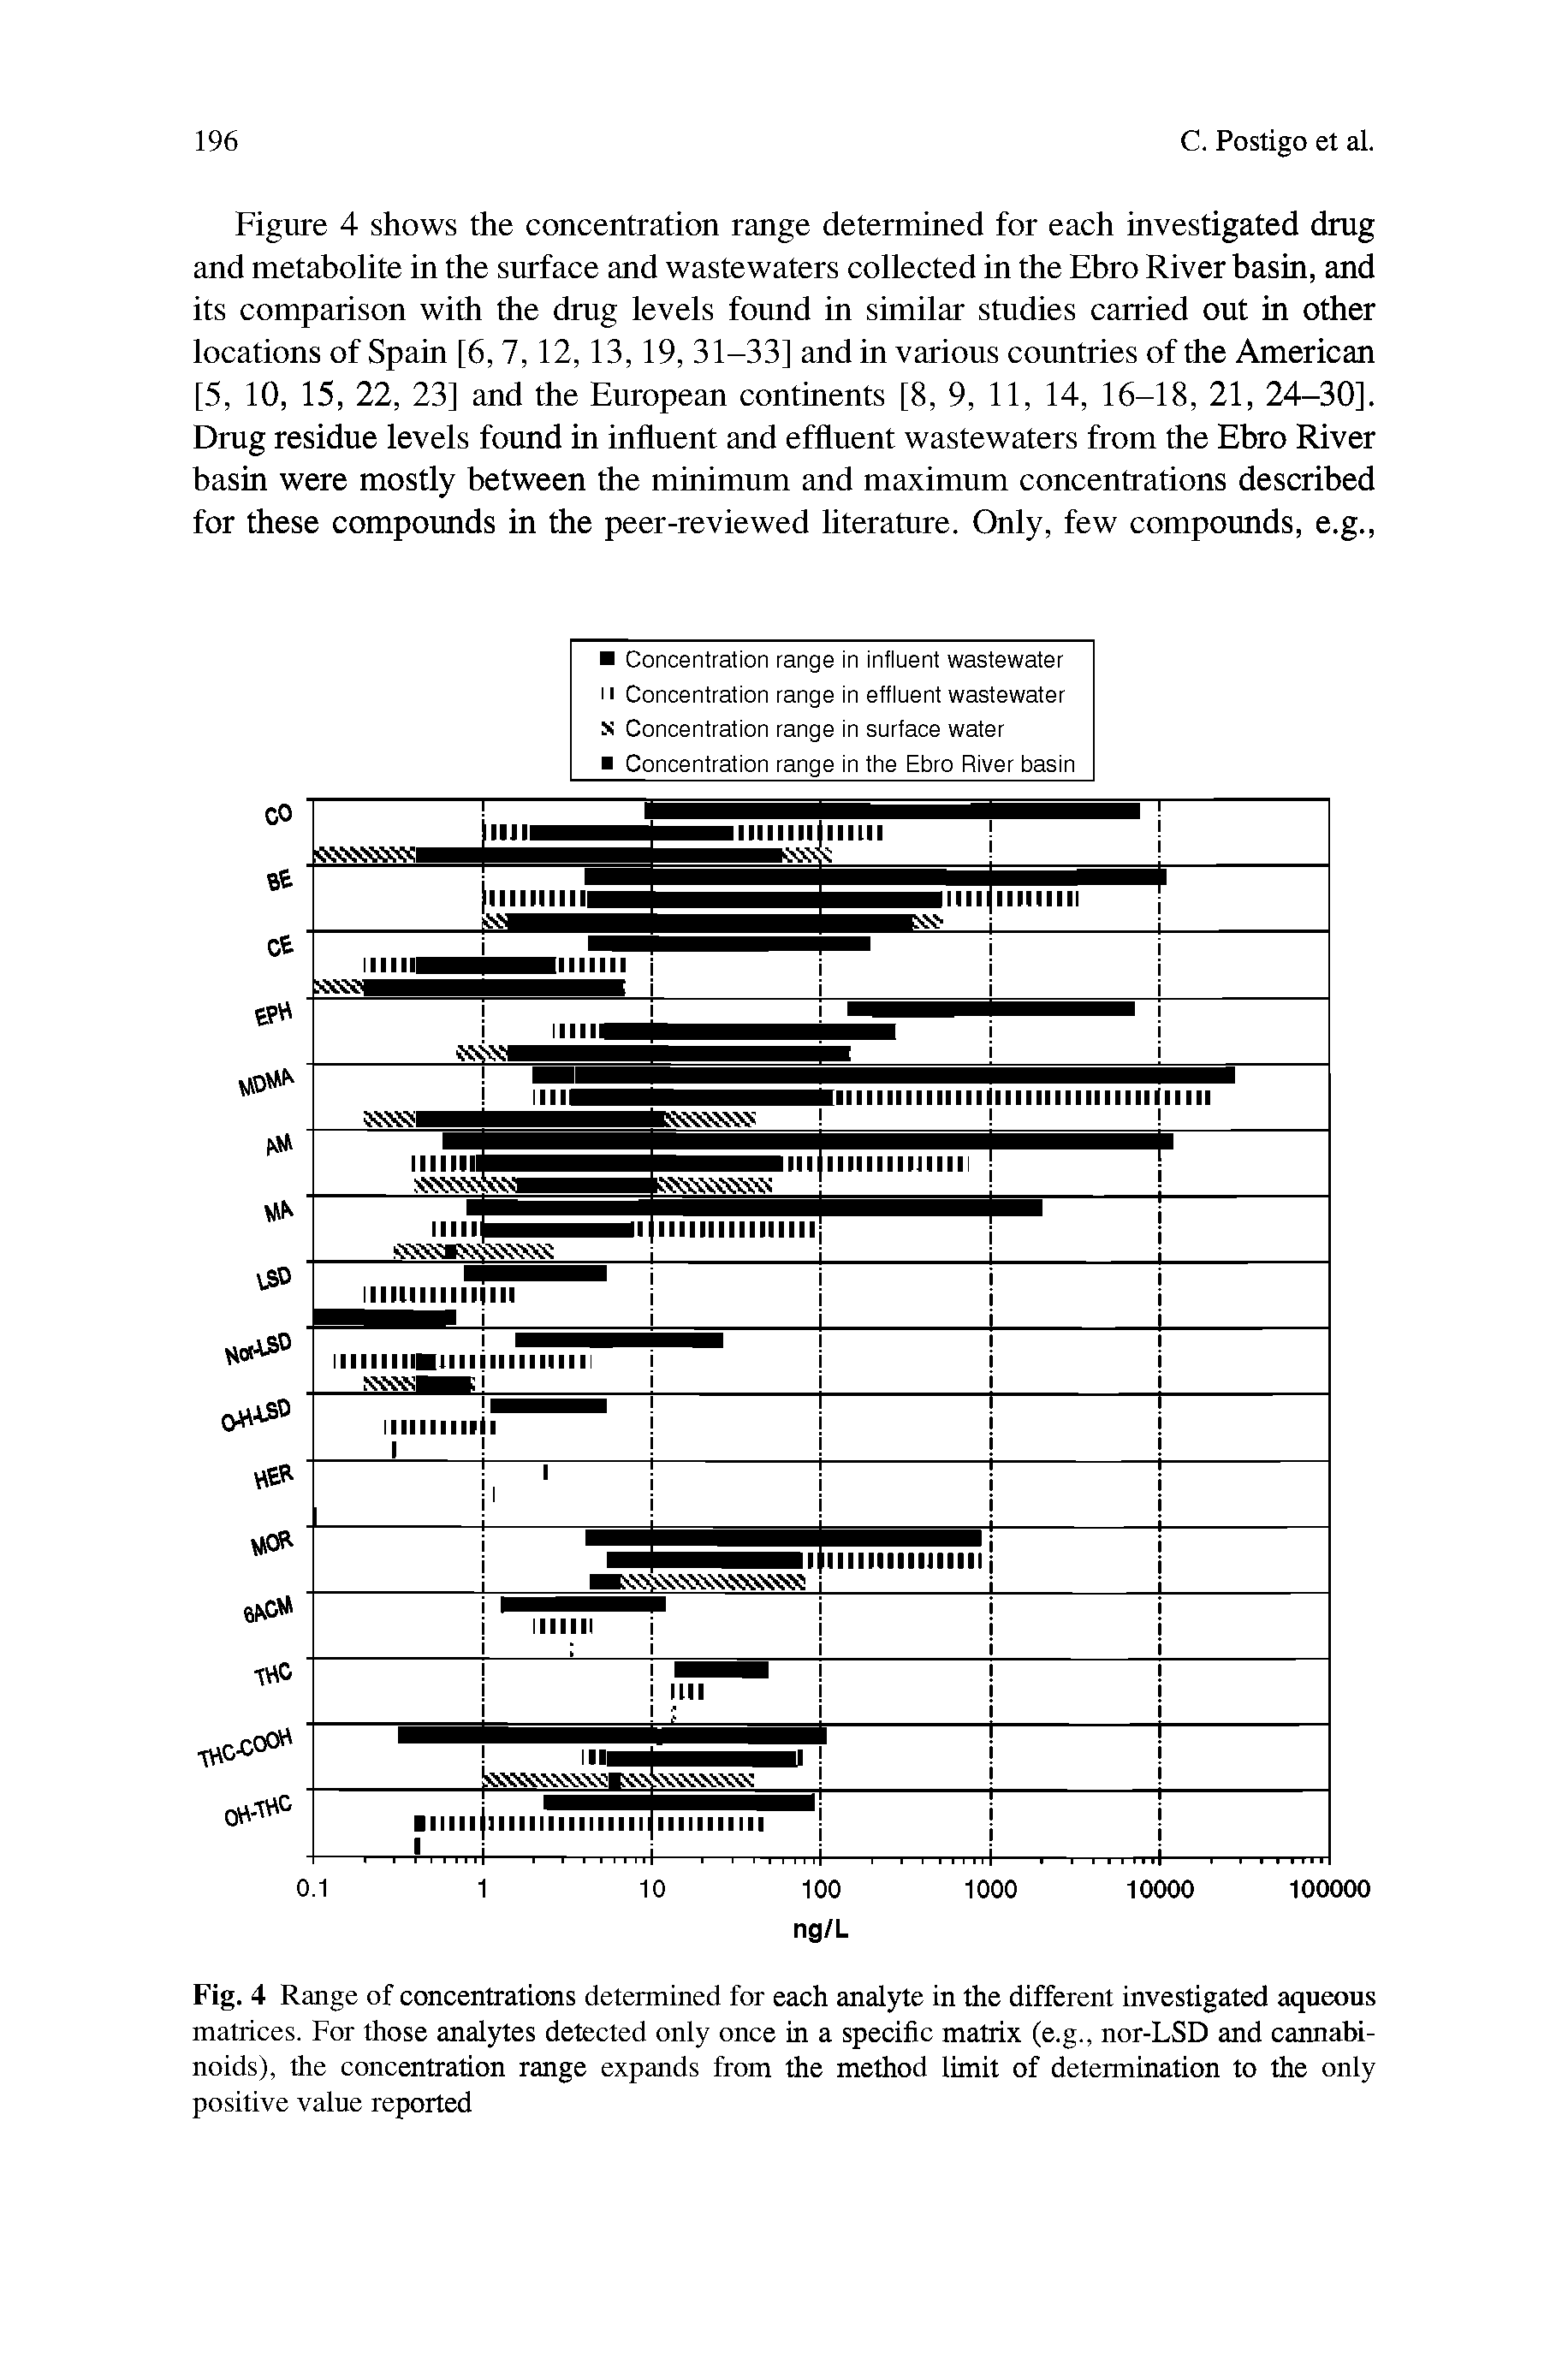 Fig. 4 Range of concentrations determined for each analyte in the different investigated aqueous matrices. For those analytes detected only once in a specific matrix (e.g., nor-LSD and cannabi-noids), the concentration range expands from the method limit of determination to the only positive value reported...